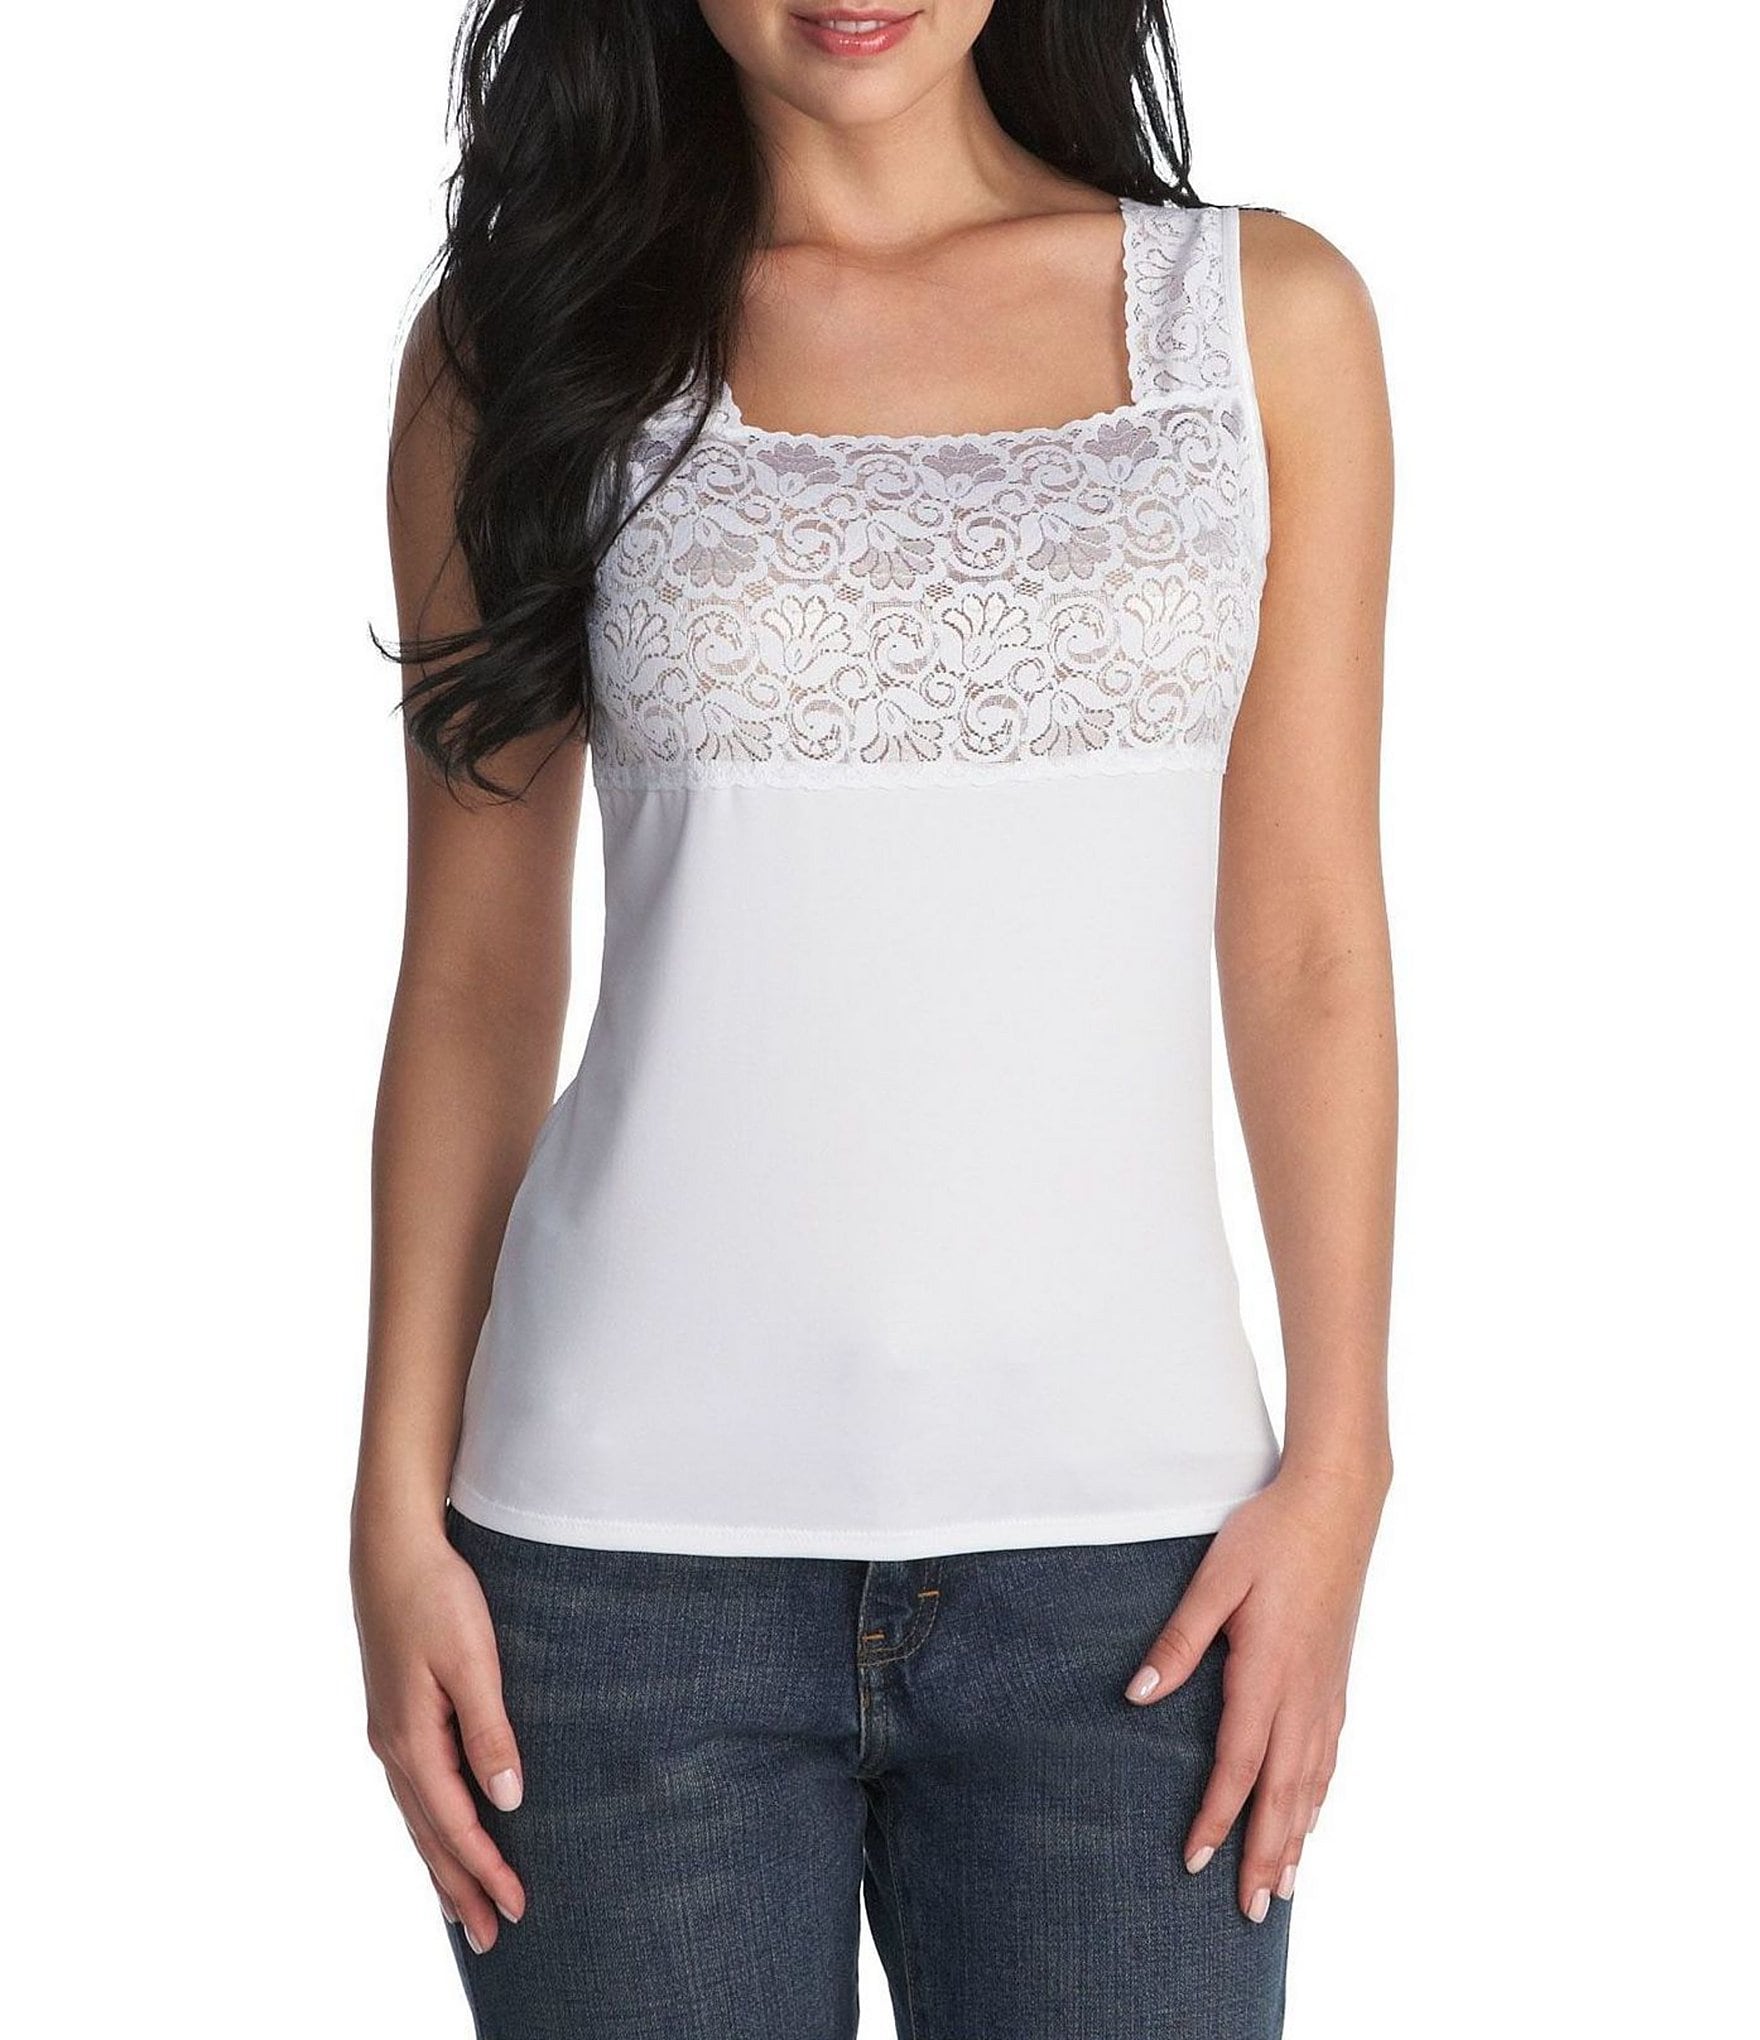 ANDMARY Everyday lace camisole